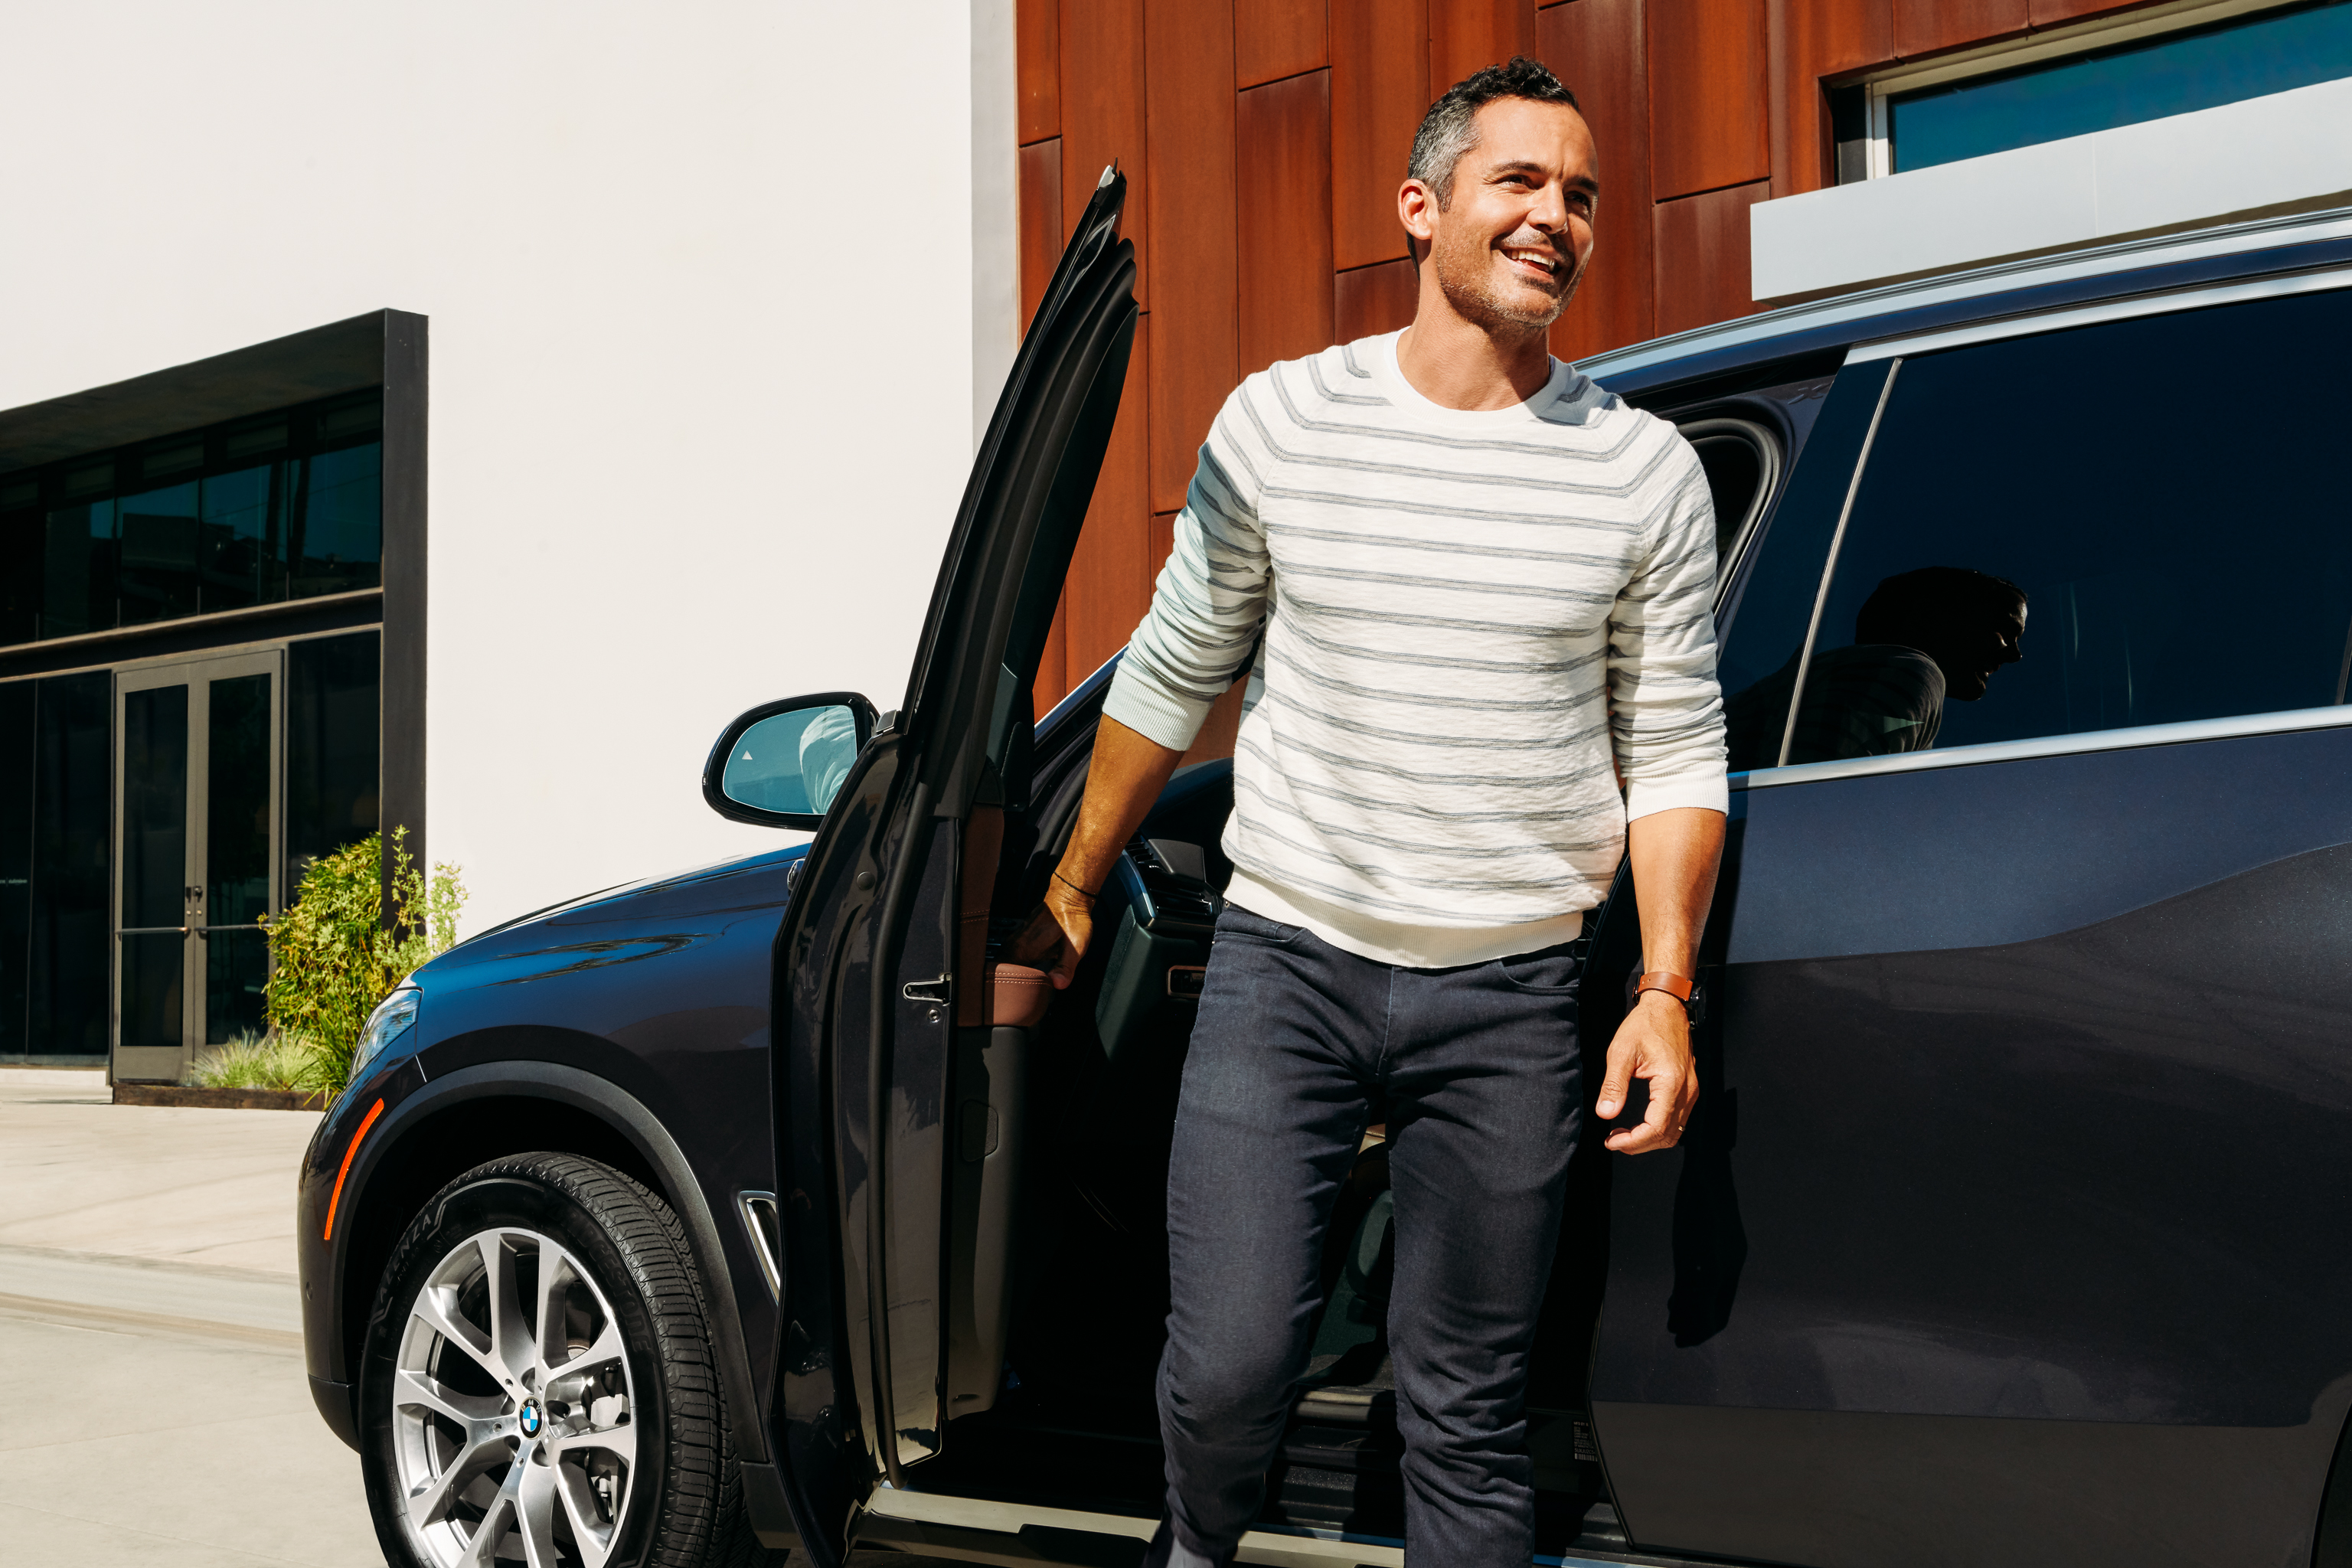 Caleb Kuhl, California Commercial Car Photographer, shoots BMW Diversity automobile lifestyle campaign at 7 locations in Los Angeles.